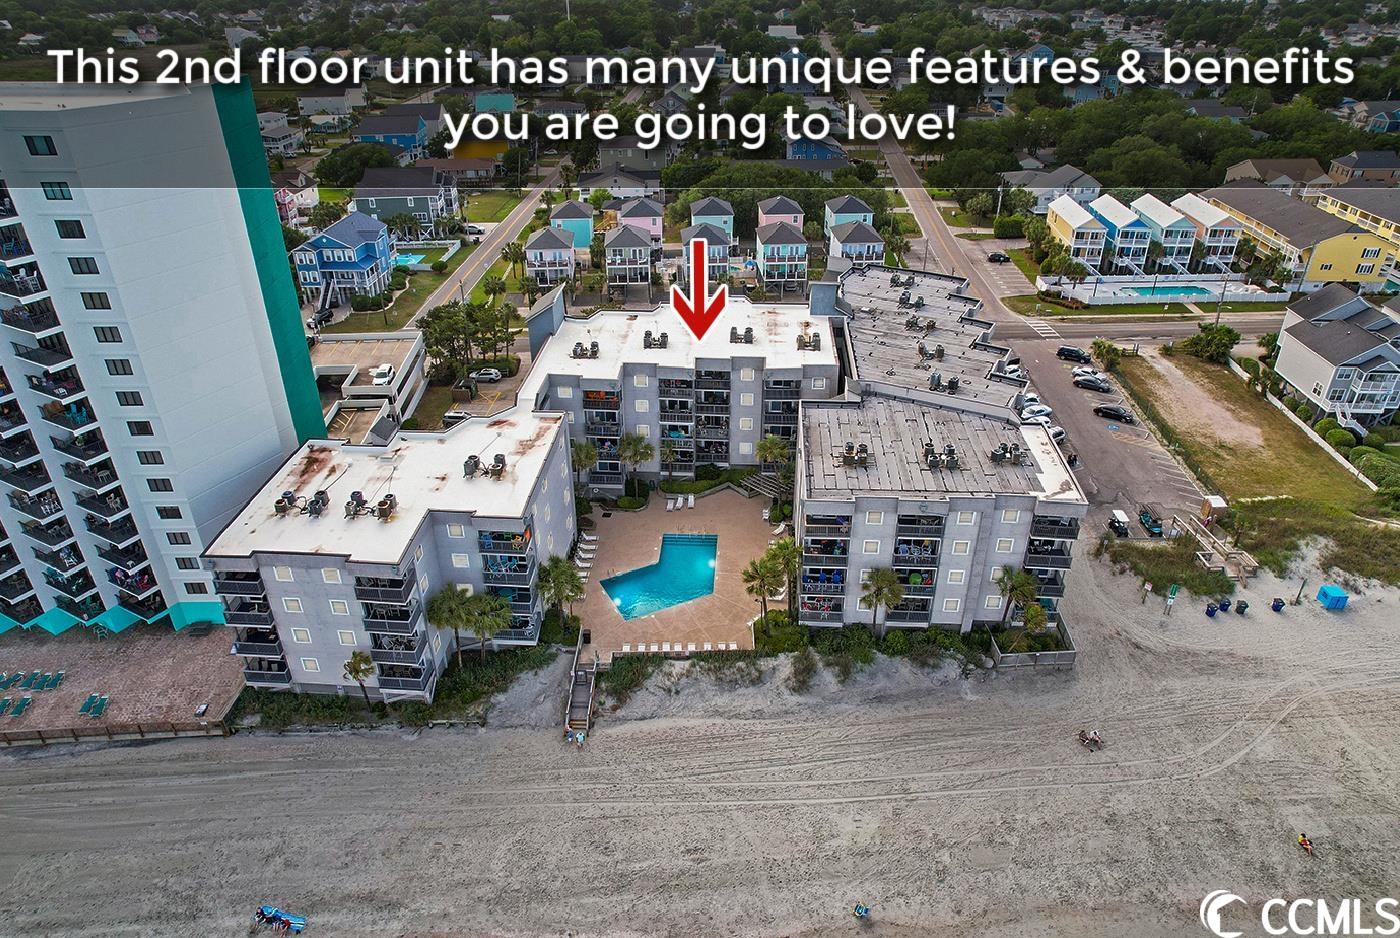 this oceanfront 3 bedroom is located on the highly desirable 2nd floor and yes, there is an elevator in the building (actually 2 and they are in the process of being updated)! there is so much to love about this unit and the strong rental potential is one of those major positives (ask your agent for details). another huge benefit is the additional protection from the elements as it sits back over the pool and is protected by 2 other units in the community. this building can take much less abuse with this additional wall of protection. yet, you still get your direct oceanfront views!!! seamaster does have 2 elevators, an oceanfront pool, low maintenance concrete fiber siding, and extra overflow parking (a huge feature compared to other buildings!). hoa fee includes building insurance, trash pickup, landscaping, cable, internet, water, pest control, elevator service, and common area expenses. so the dues are quite reasonable for what all is included here at seamaster. there are also rental bookings and income in place with a local vacation rental company. unlike some self-managed properties, this makes for a very smooth transition process for the new owner. this unit is being sold fully furnished. it's turn-key and ready to go!